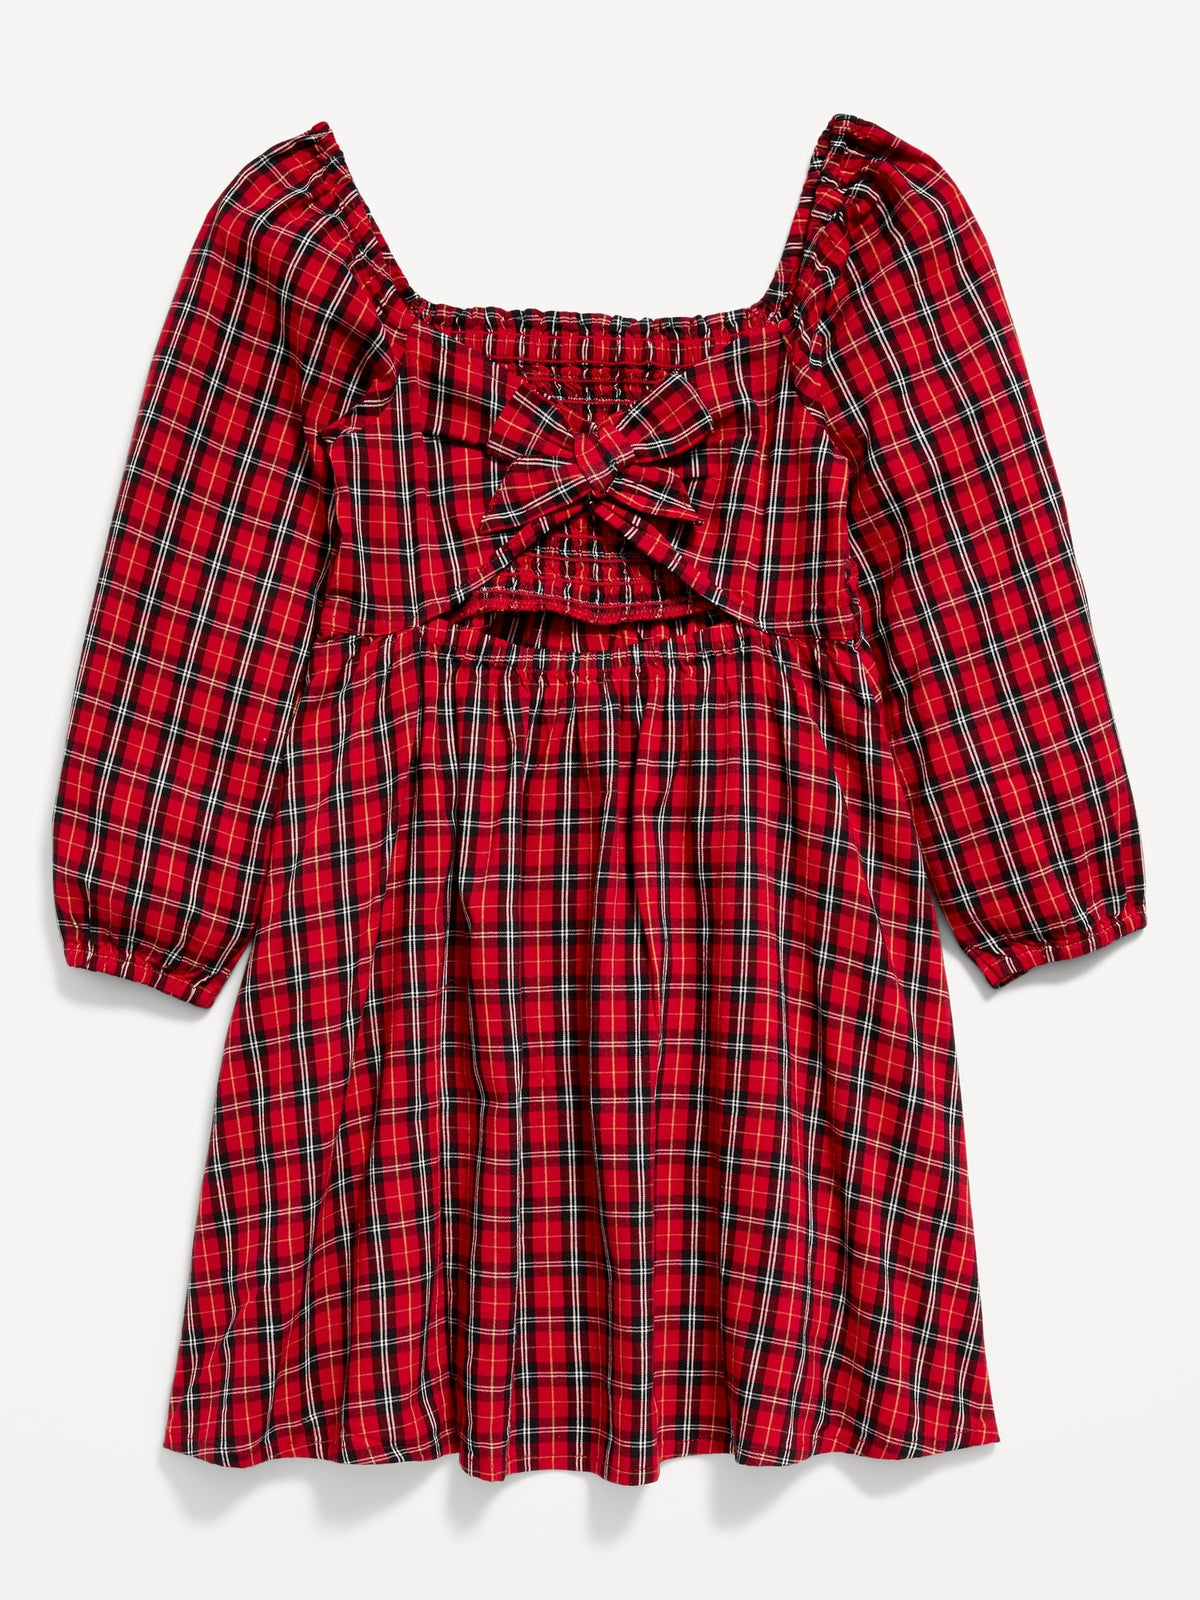 Small Red Plaid